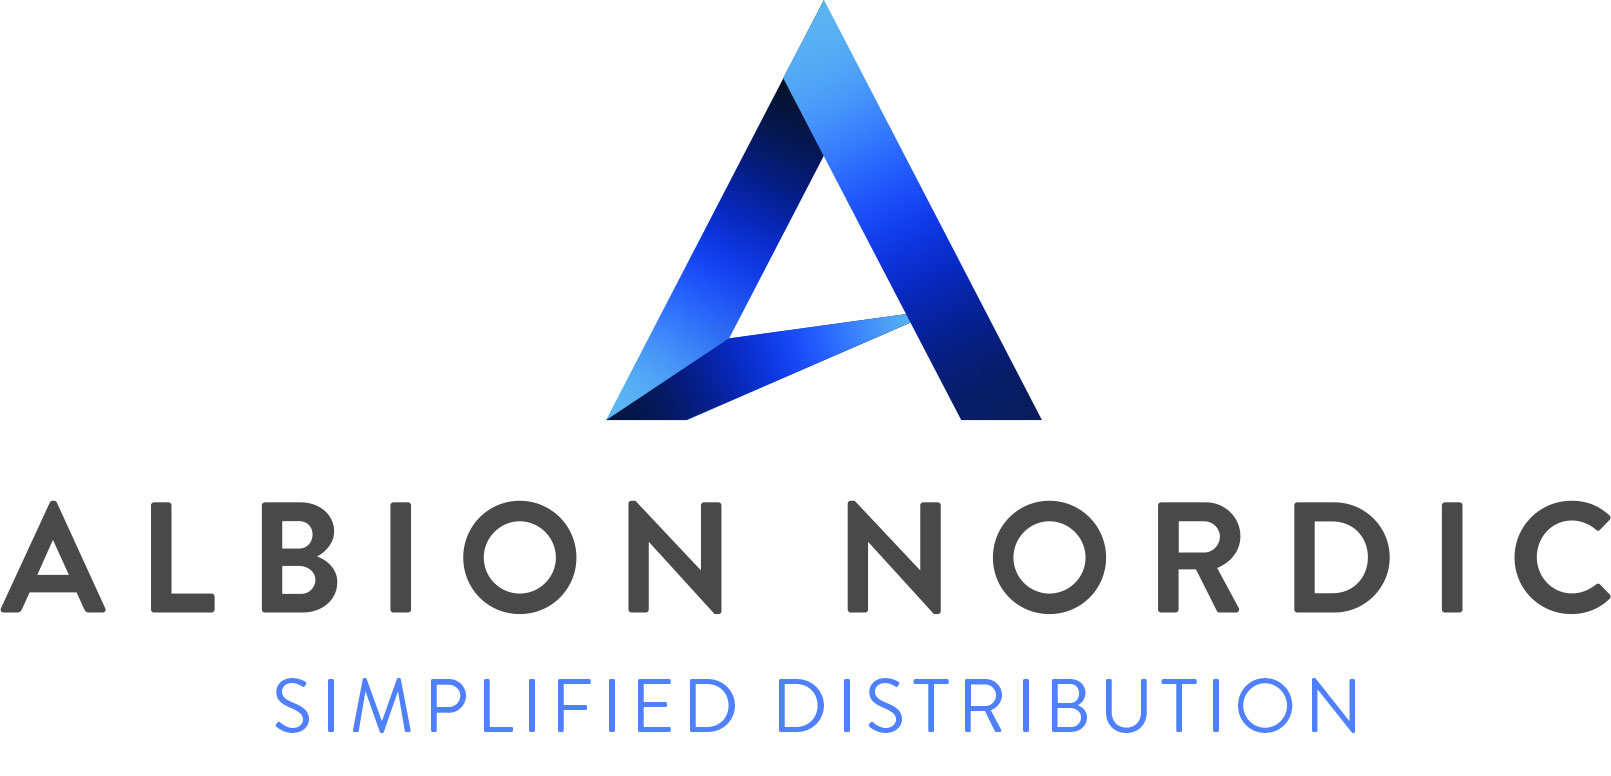 ALBION NORDIC    SIMPLIFIED DISTRIBUTION